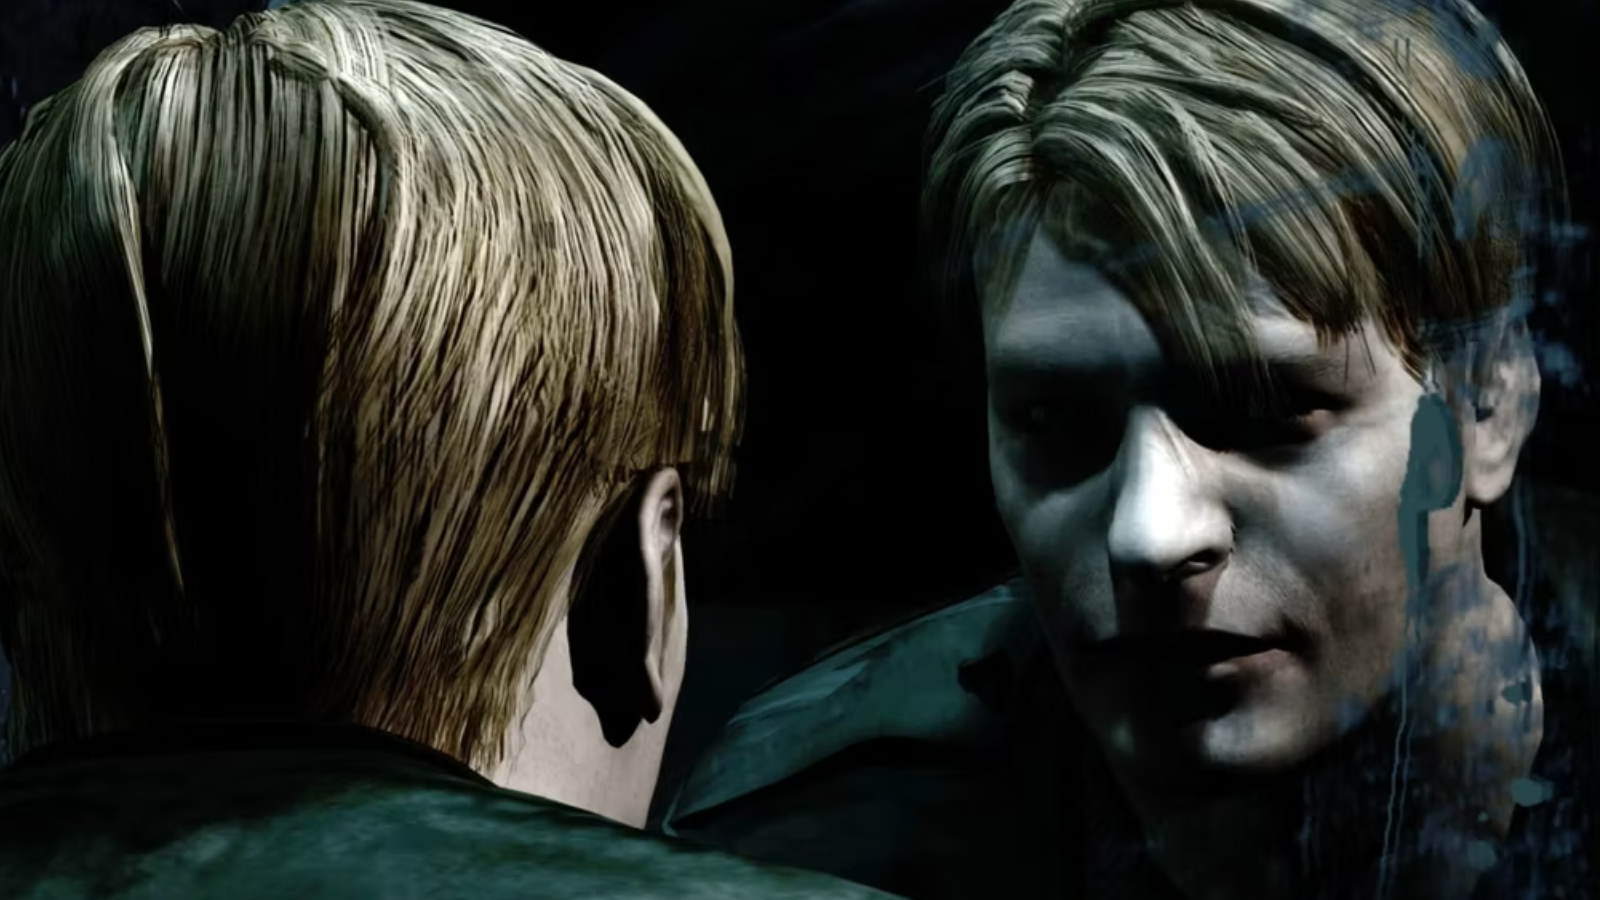 Silent Hill 2 remake will be faithful to the original title